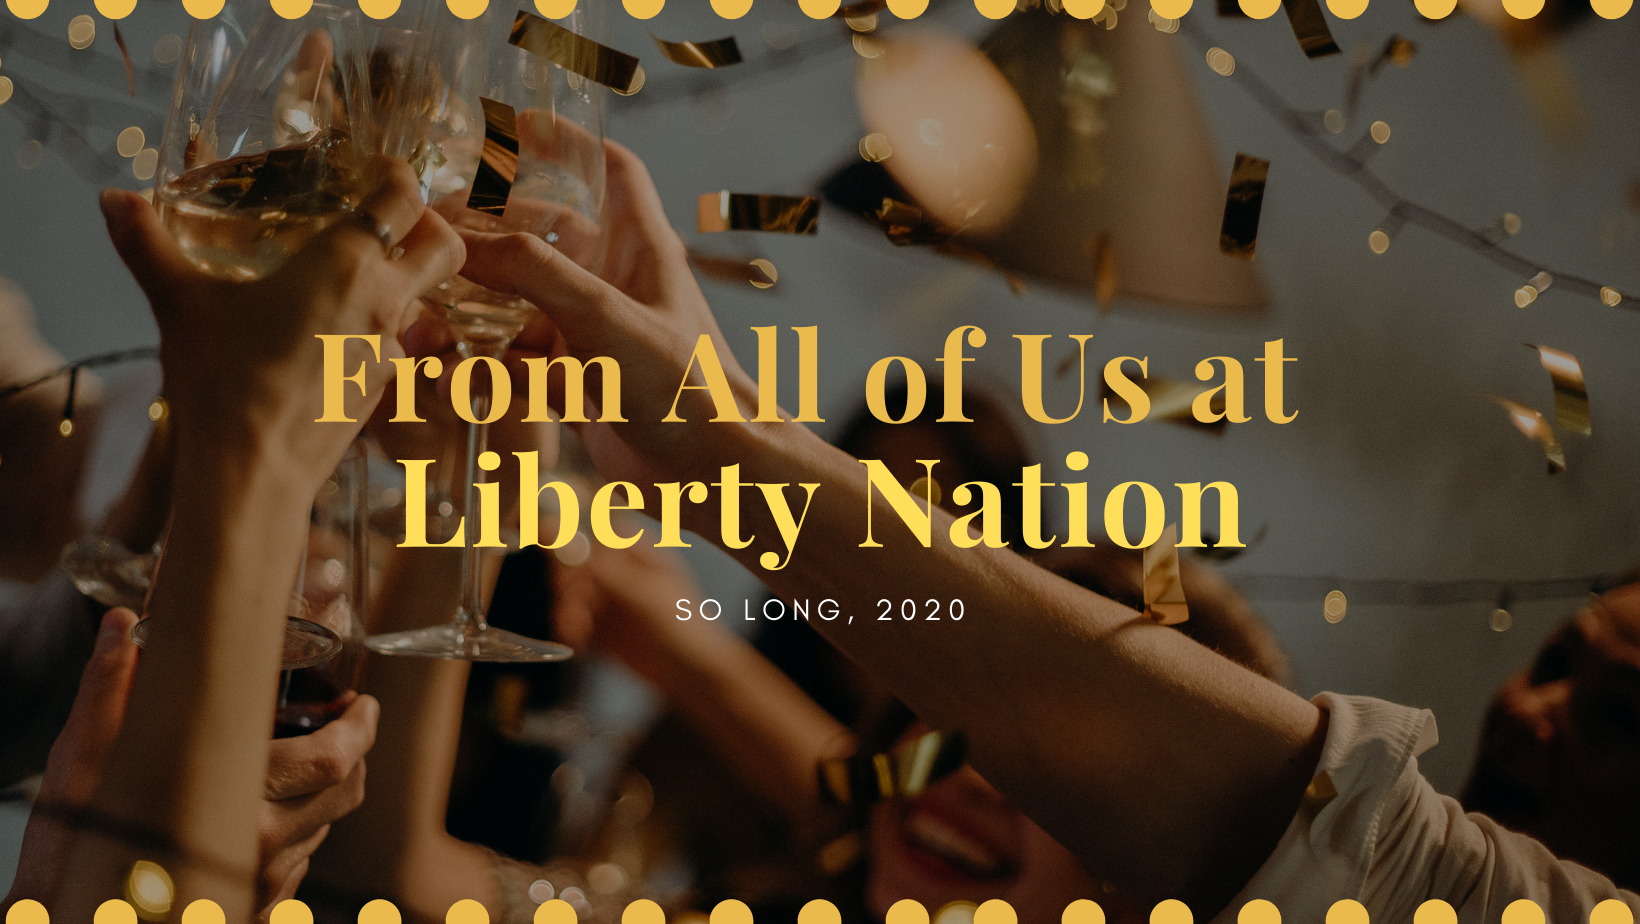 A Special New Year's Eve Message from Liberty Nation